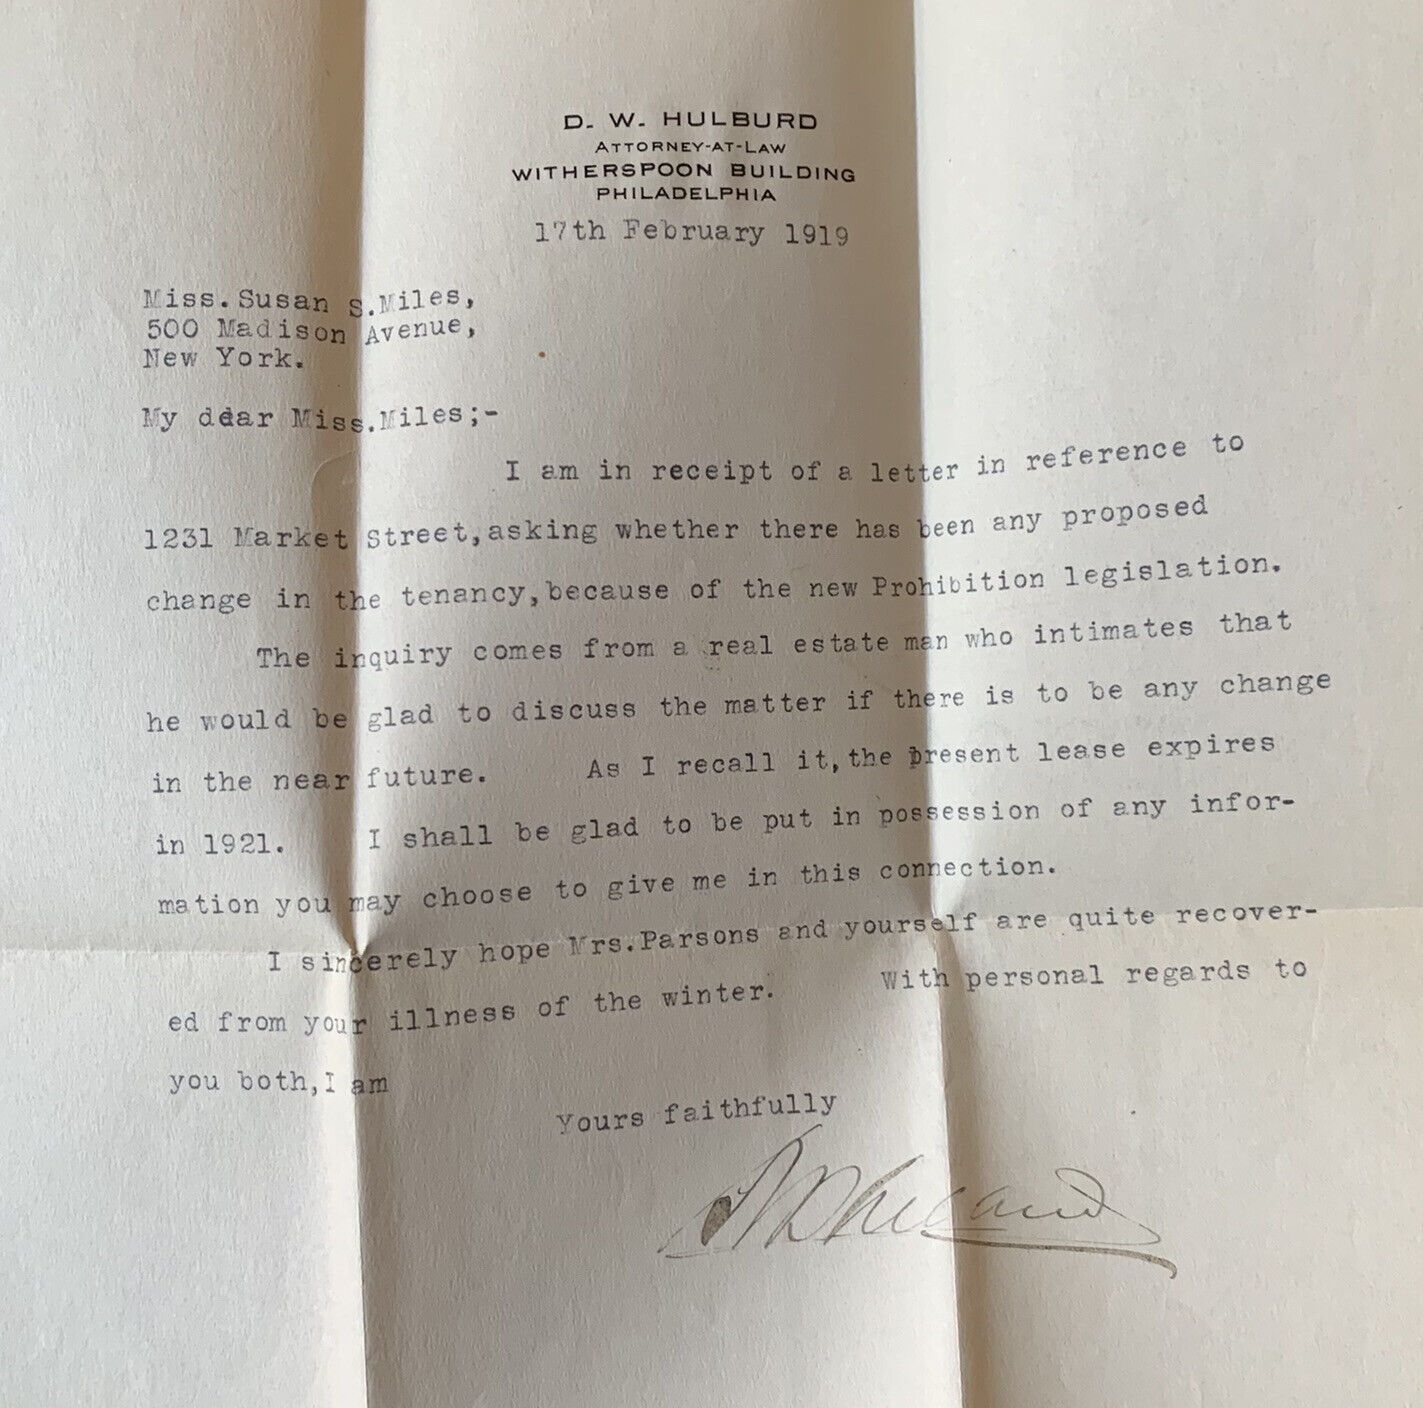 1919 NEW YORK TYPED LETTER ASKING ABOUT THE PROHIBITION LEGISLATION AND TENANCY